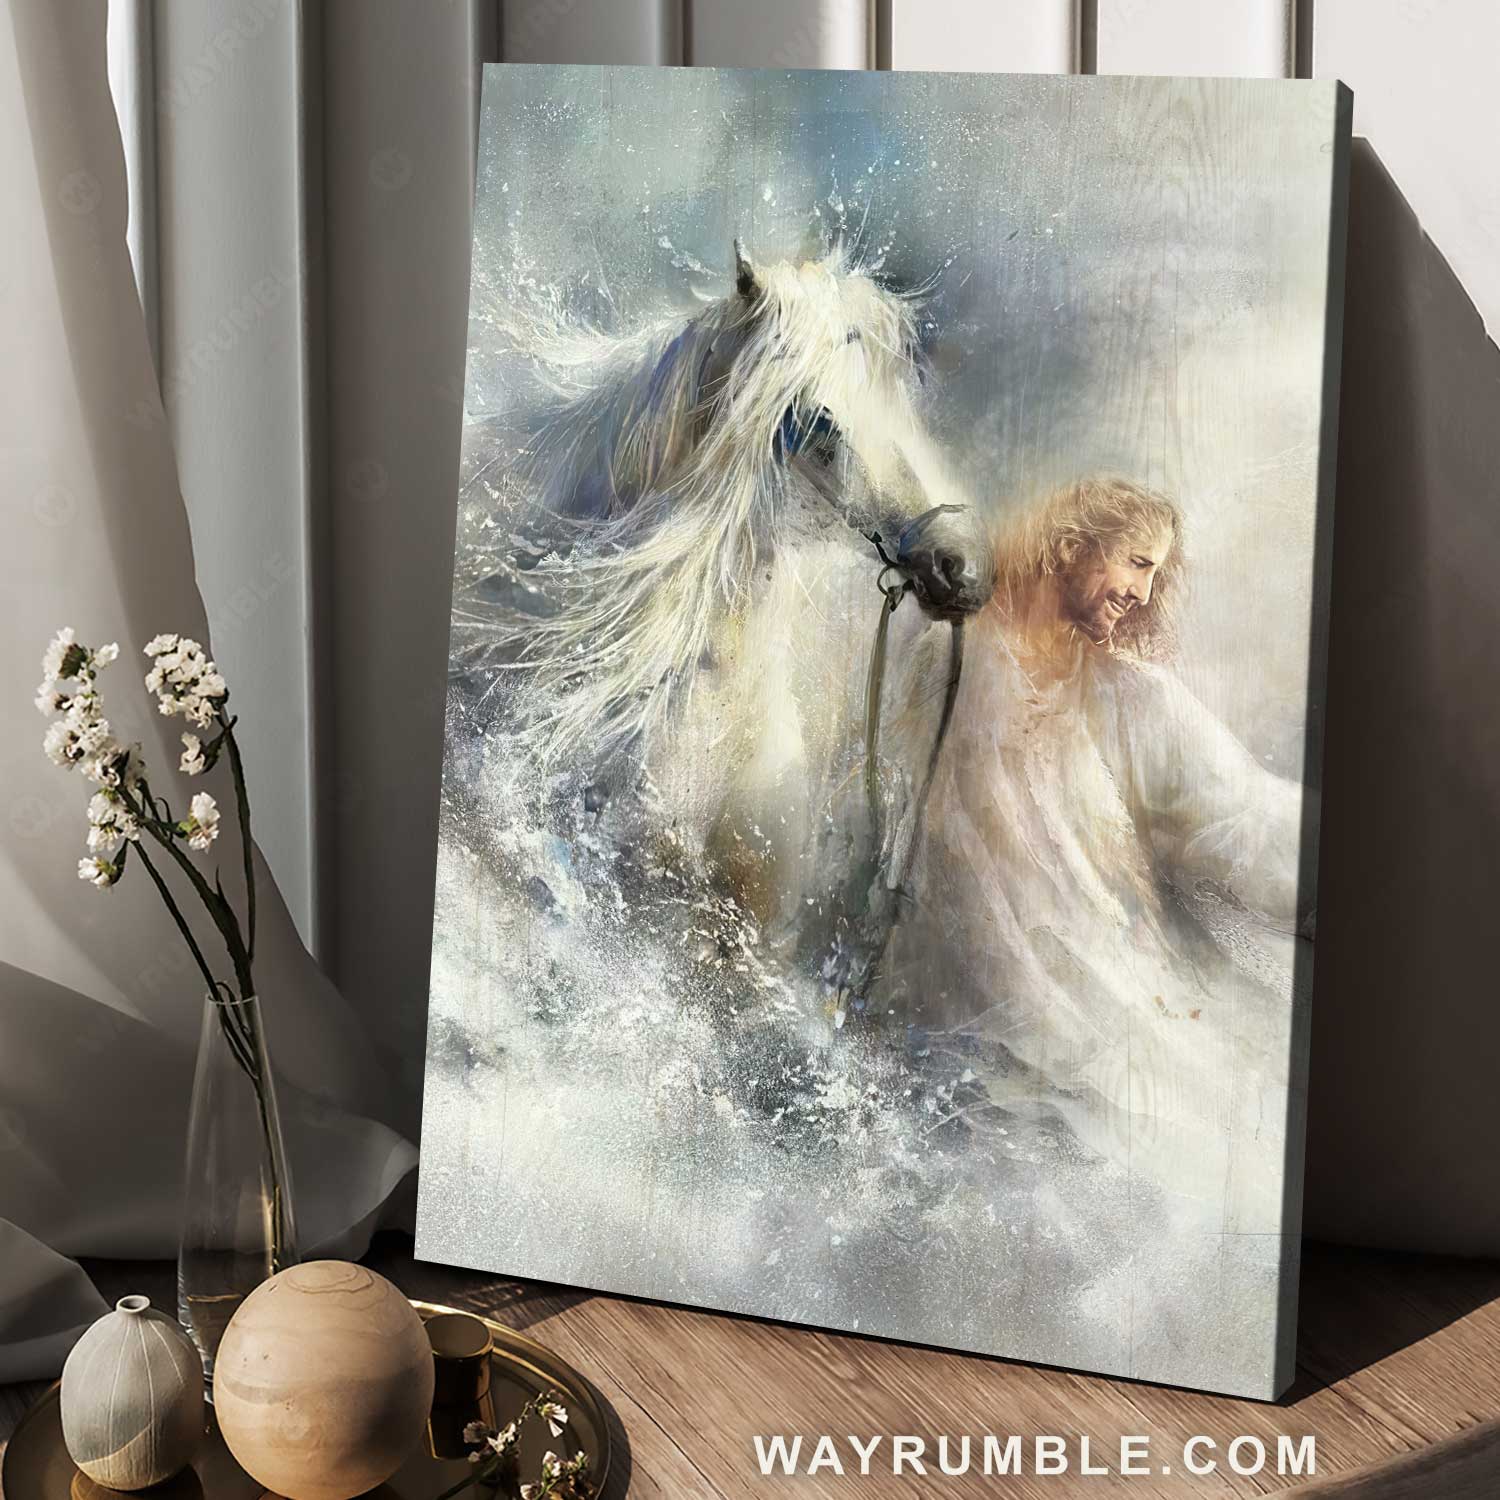 Jesus painting, Ocean painting, He comes with a white horse - Jesus Portrait Canvas Prints, Christian Wall Art